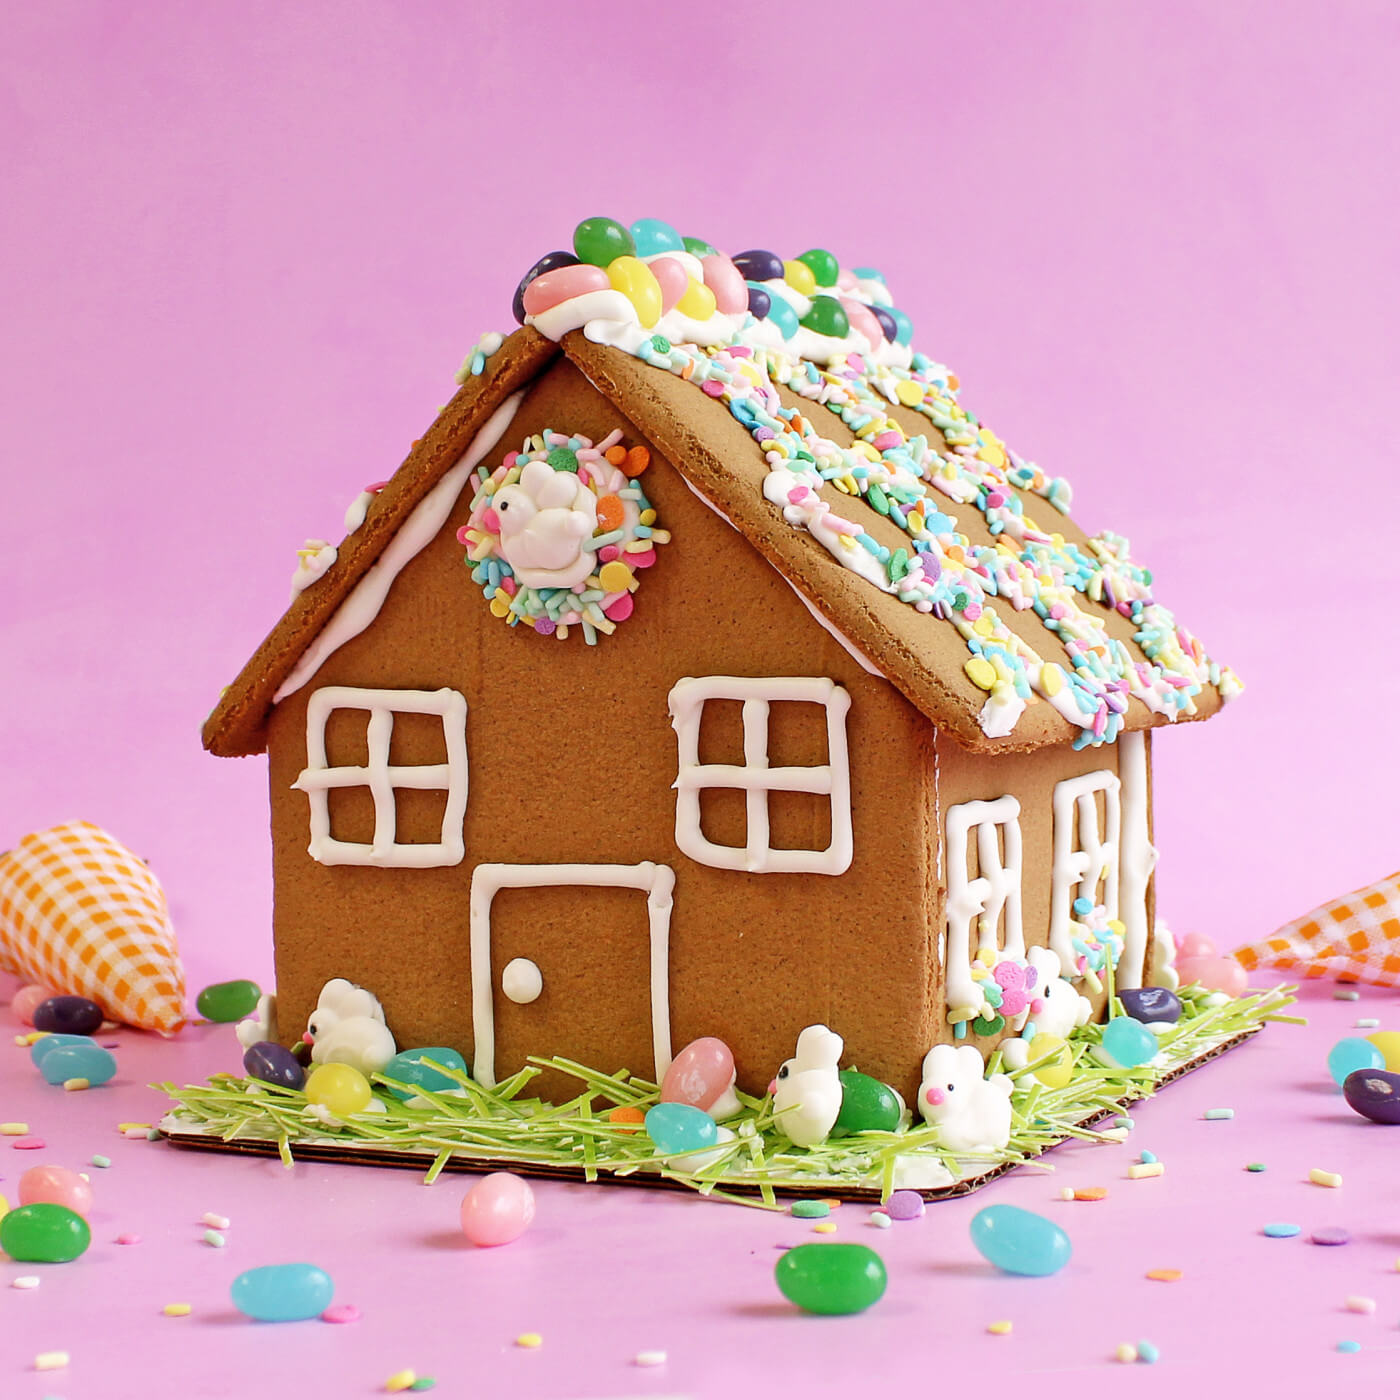 Bunny Hutch Gingerbread House Kit